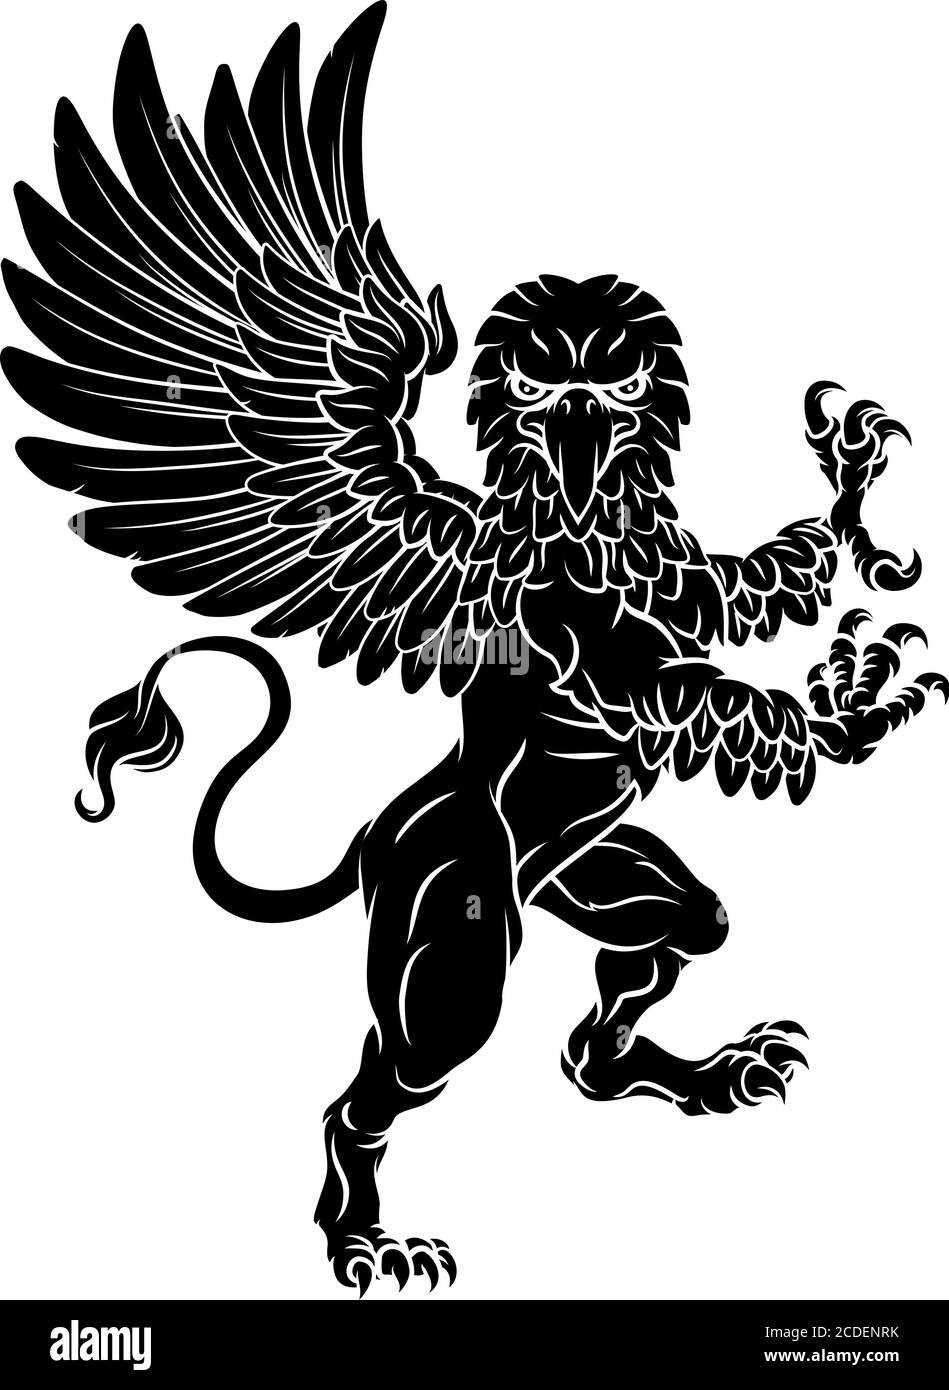 Griffin drawing clipart Stock Vector Images - Alamy